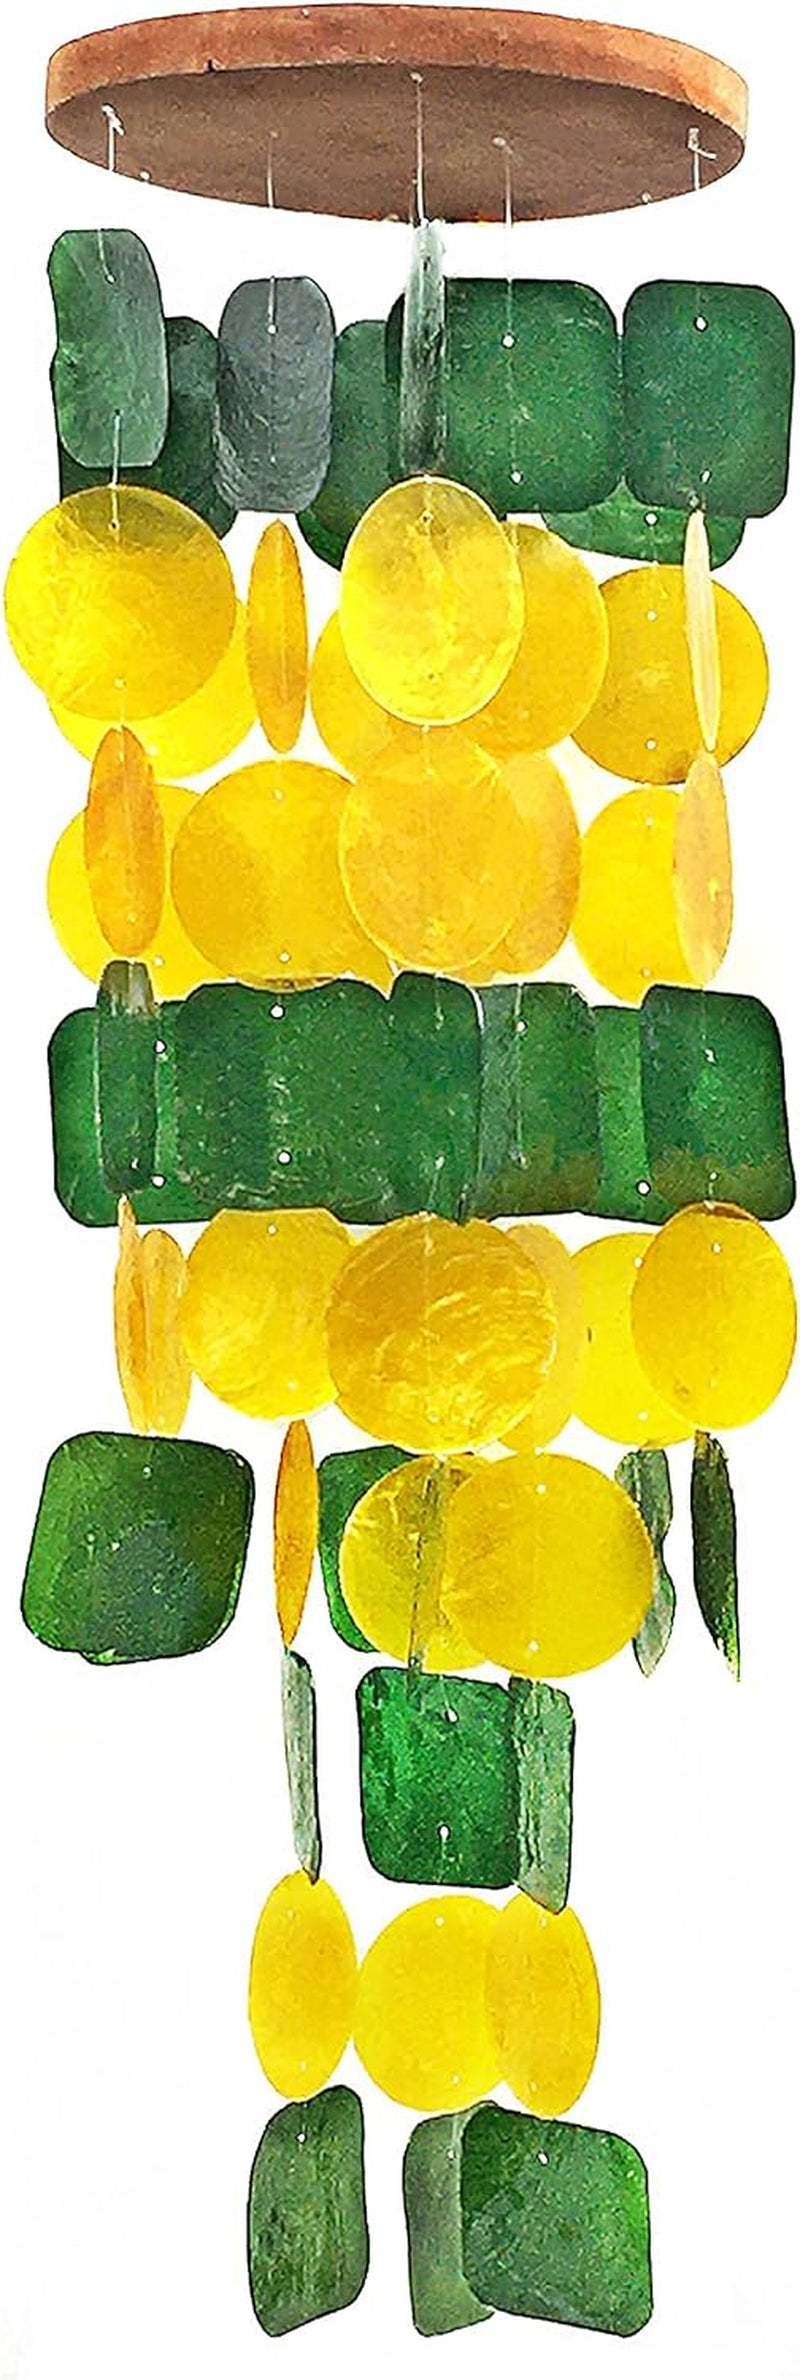 24898 Capiz Wind Chimes Sea Glass Shells Large 27 Inch outside Windchimes Home Decor Outdoor Garden Patio Yard Lawn Unique Gifts for Mom Grandma Woman Sympathy Memorial Remembrance